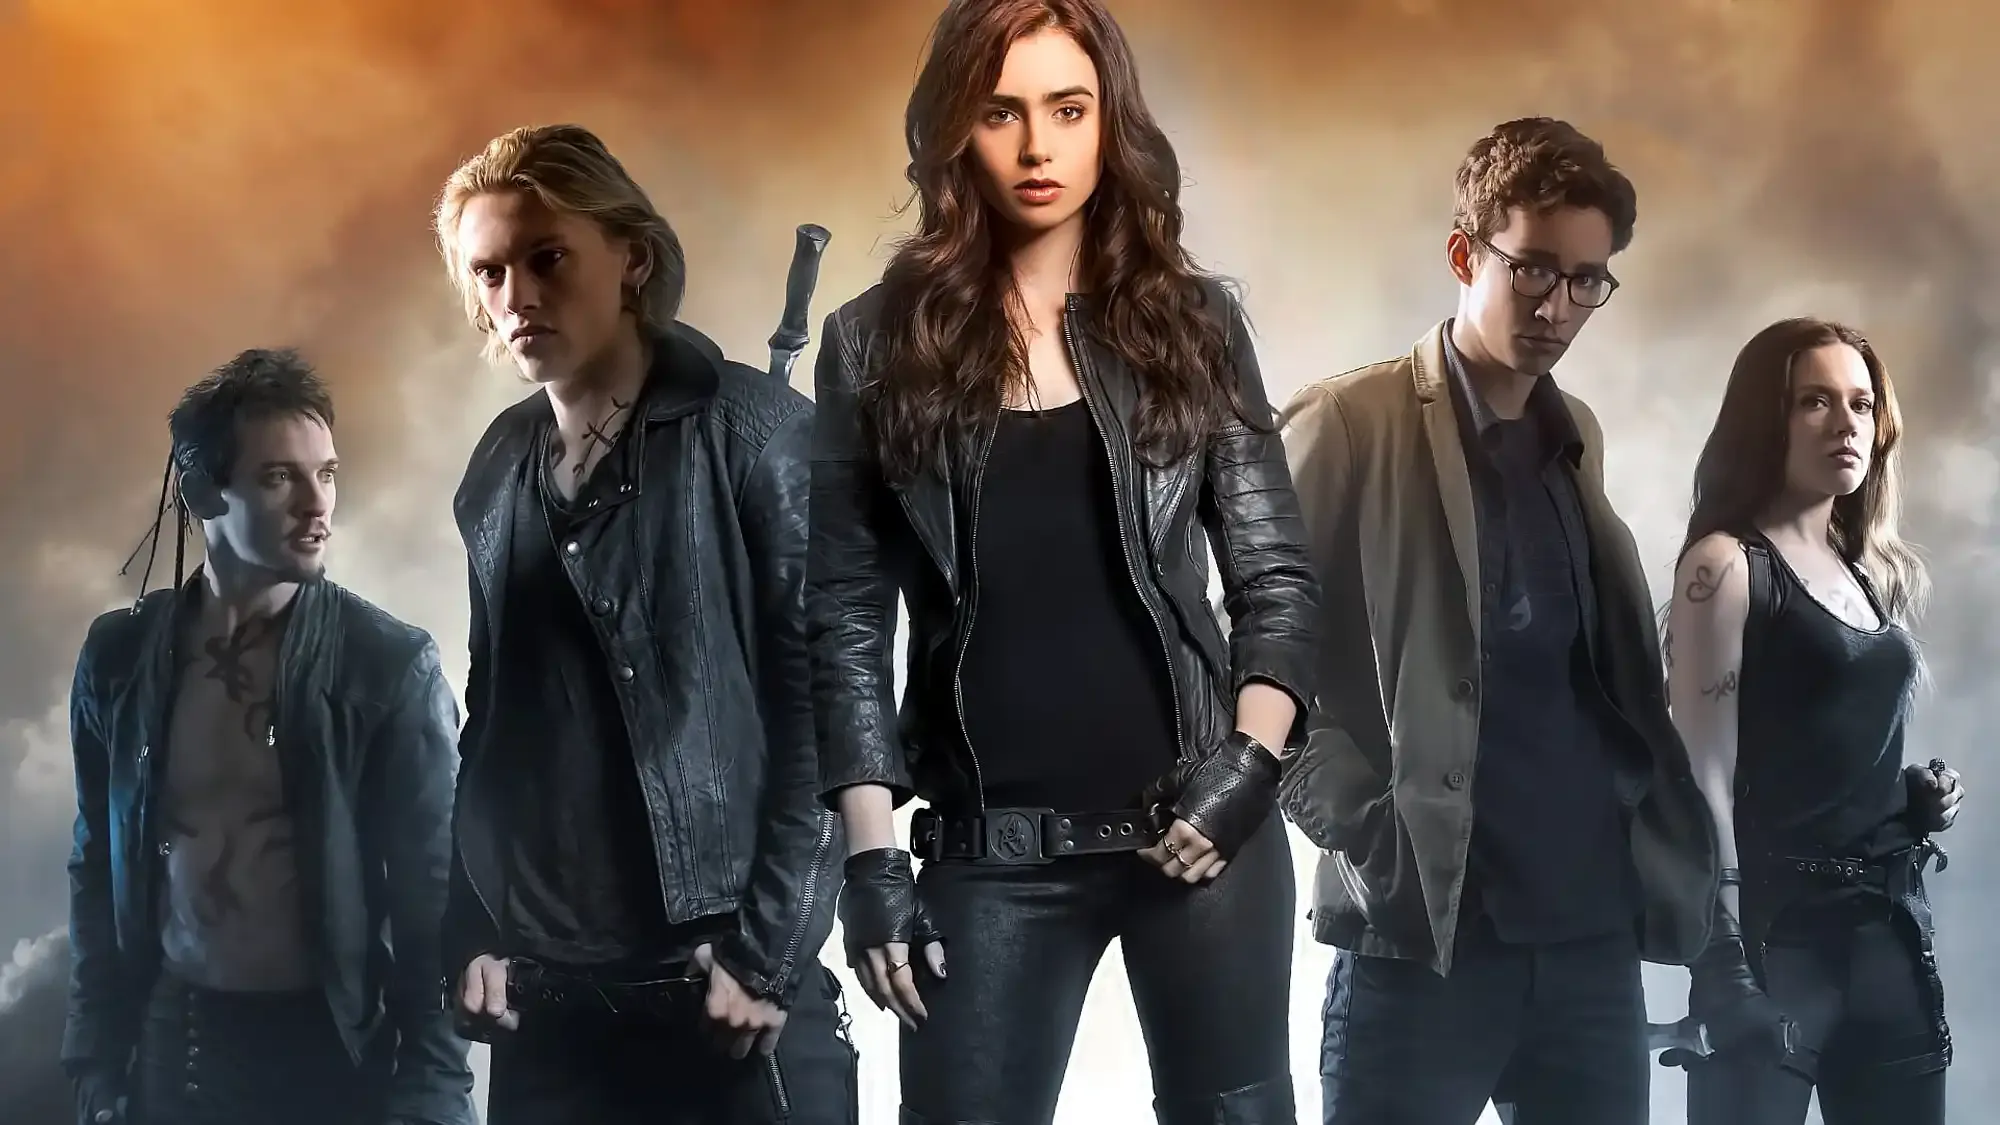 The Mortal Instruments: City of Bones movie review